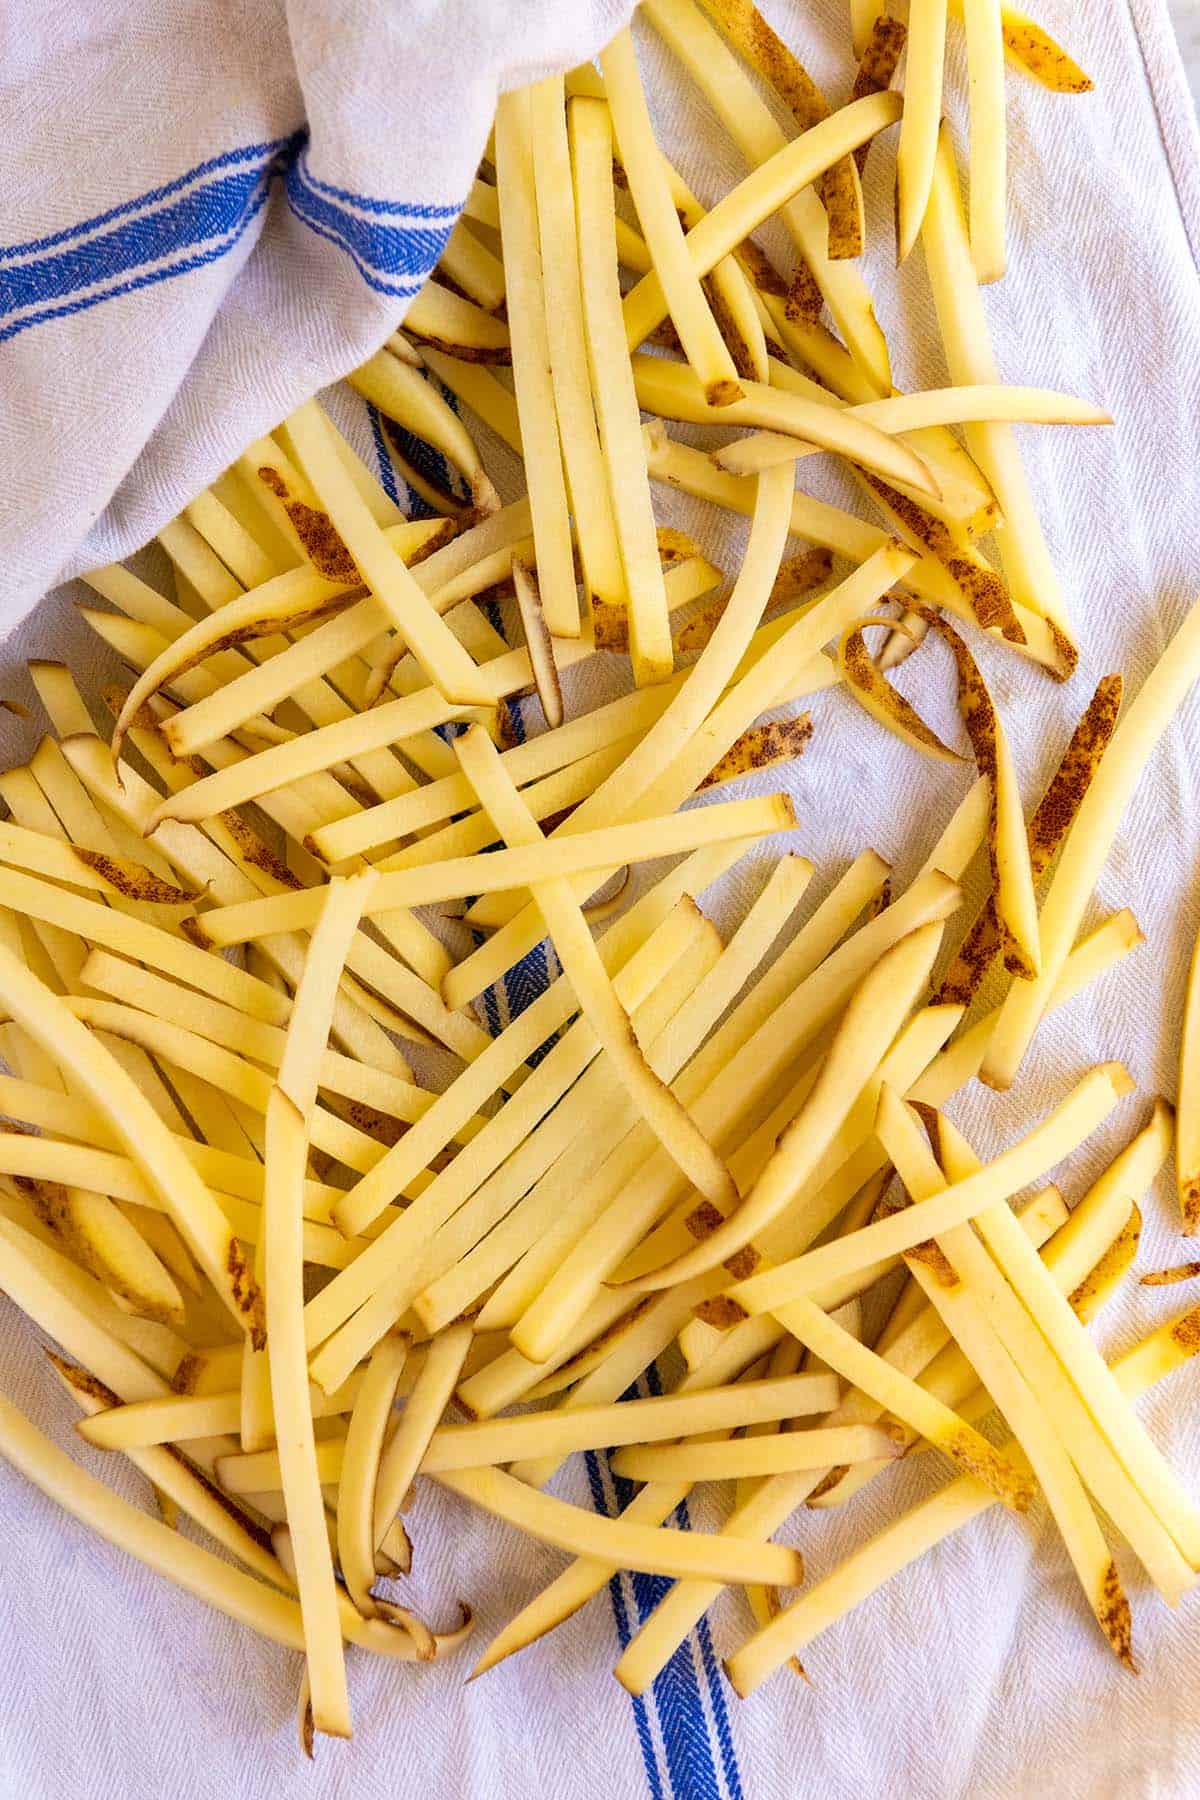 drying soaked fries before tossing with spices and baking